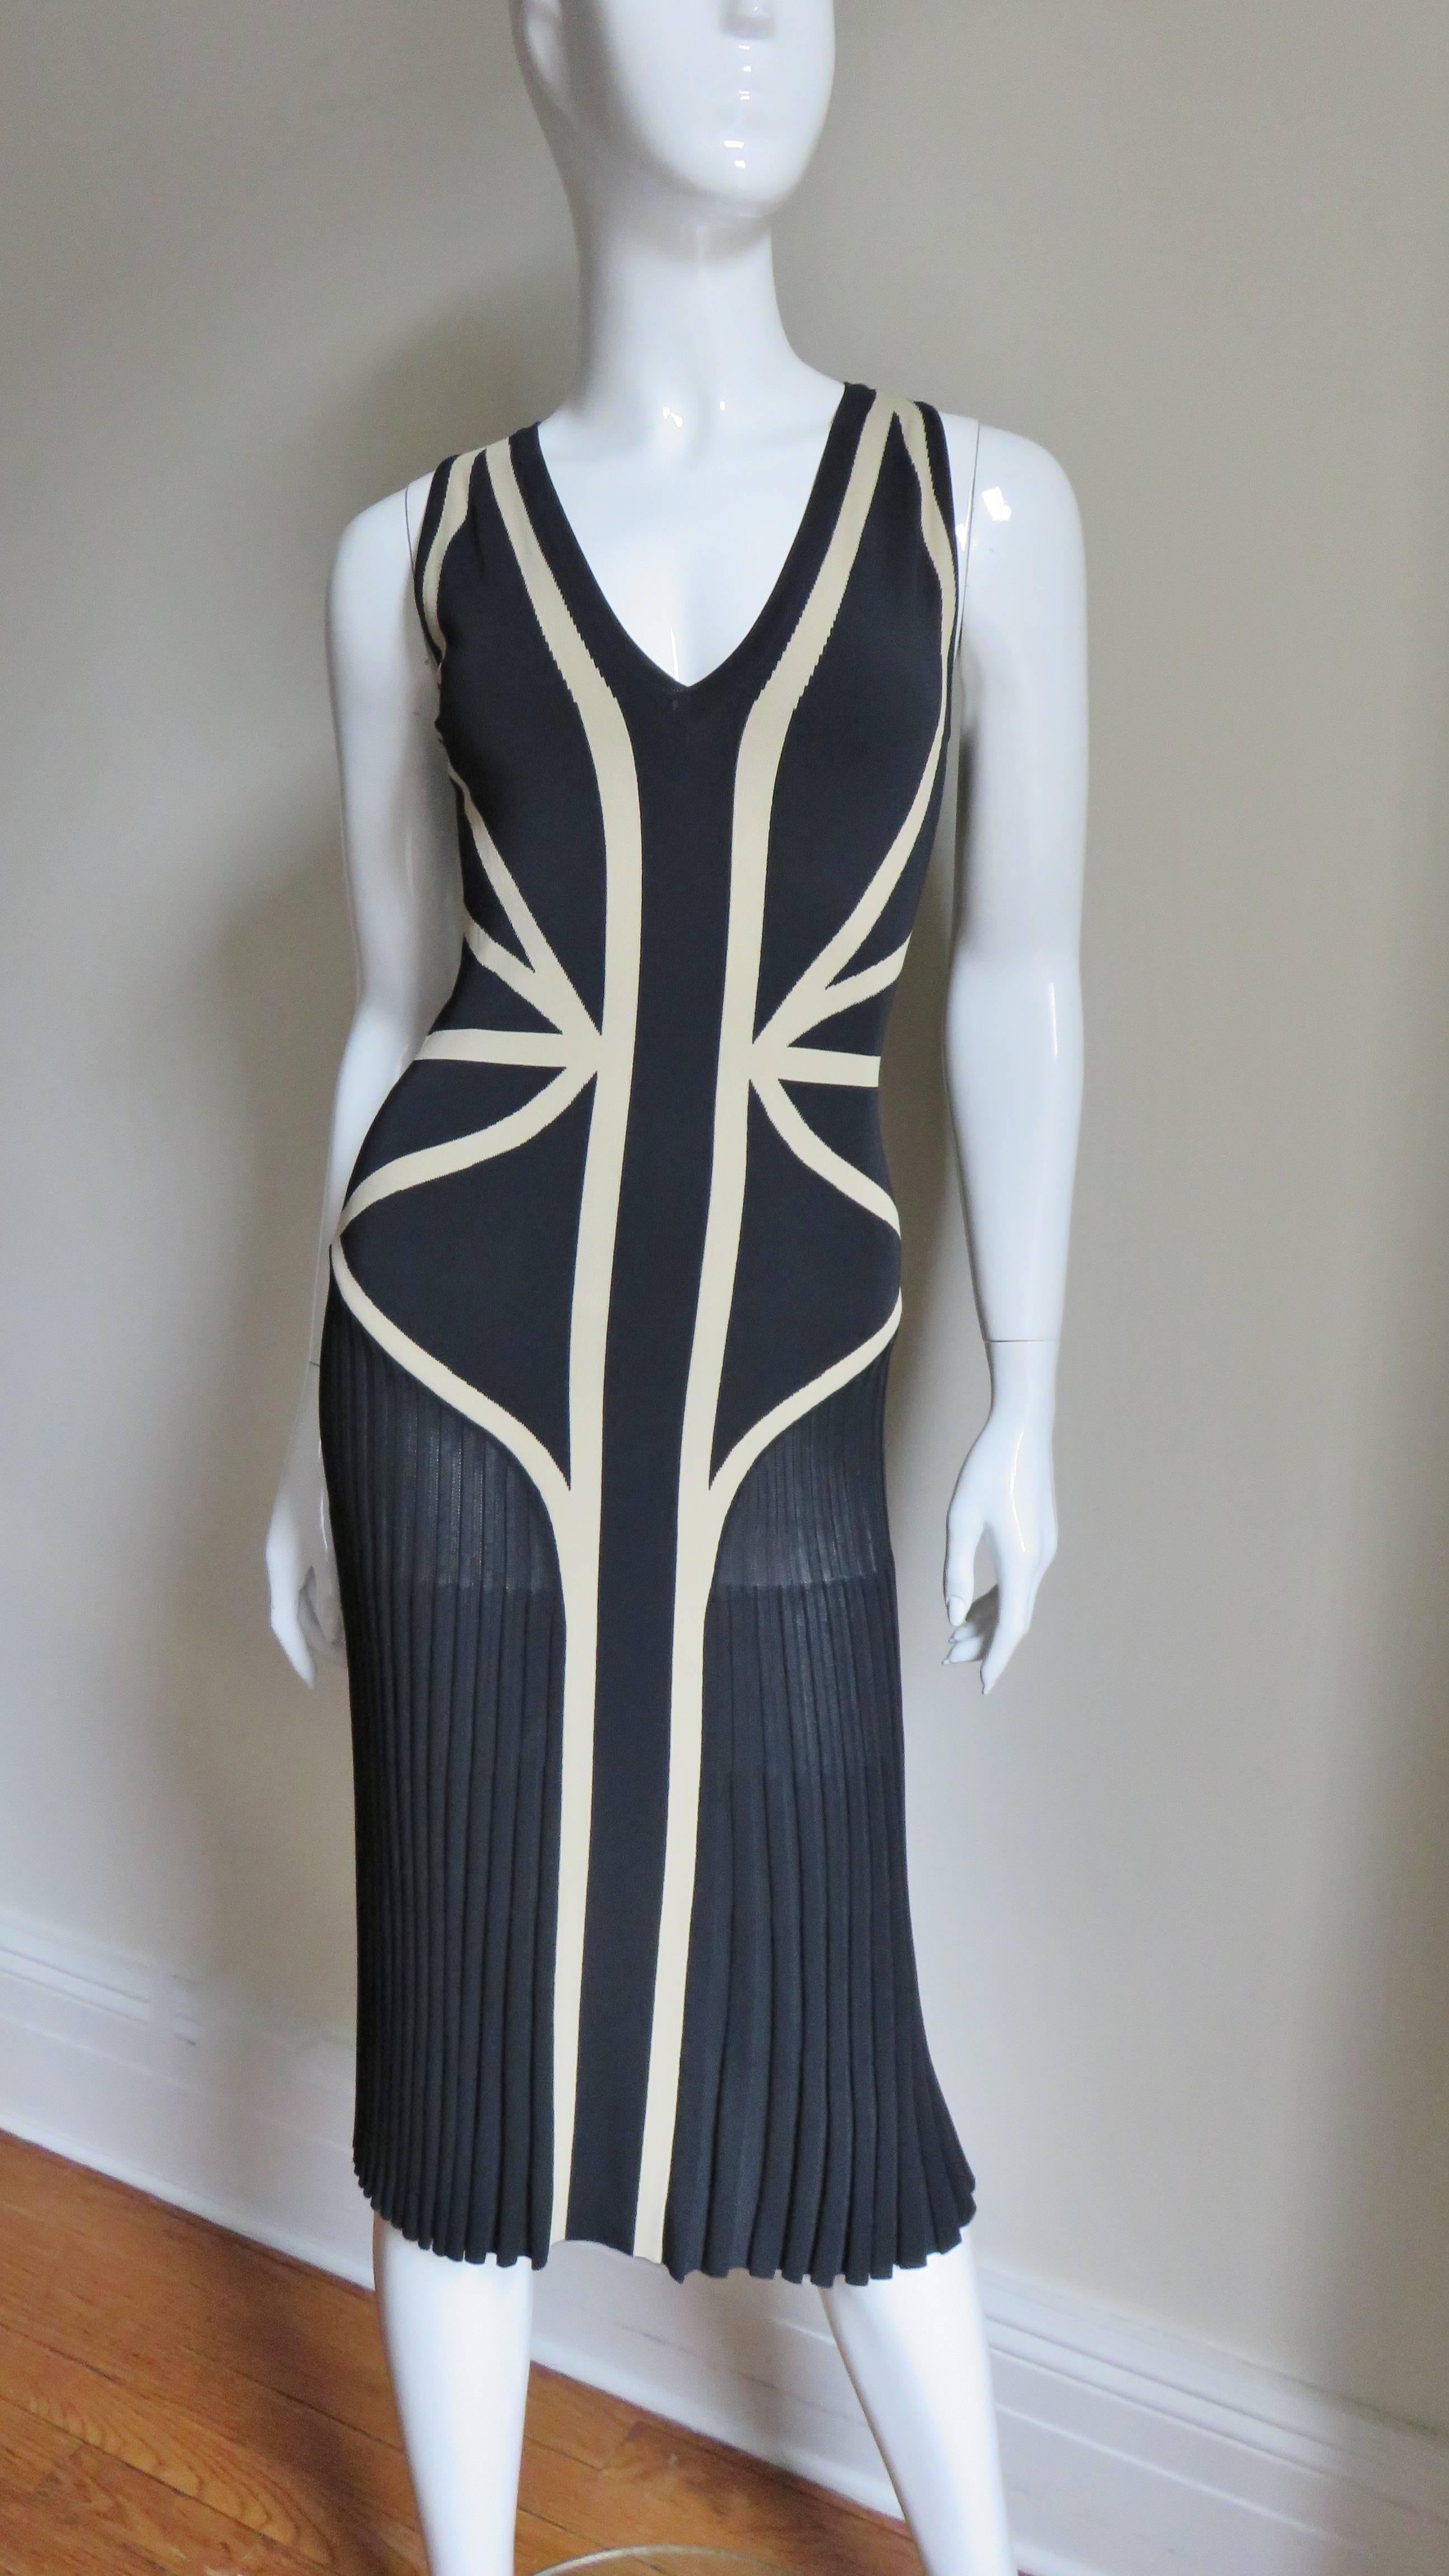 Alexander McQueen Geometric Color Block Dress In Excellent Condition For Sale In Water Mill, NY